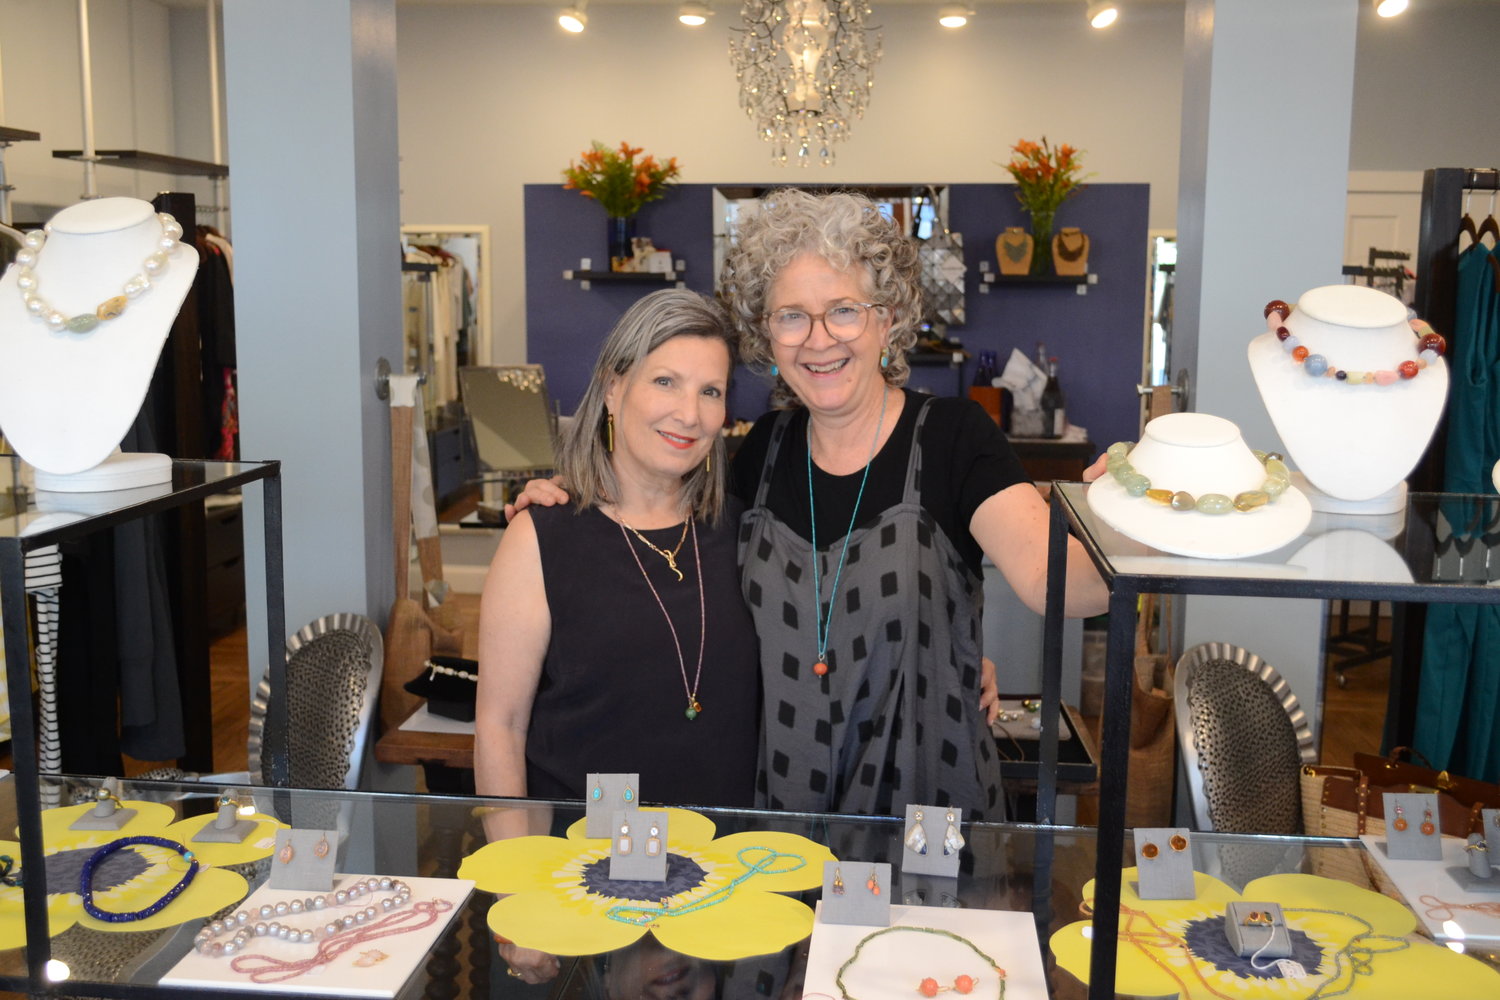 Rebecca Brenner, maker of unique fine jewelry, and Town Councilwoman Keri Cronin pose inside Dish, Cronin’s Water Street shop, where Brenner had various pieces up for sale. Brenner’s jewelry can be found on DishRI.com, and her Instagram is @rebecca_brenner_jewelry.